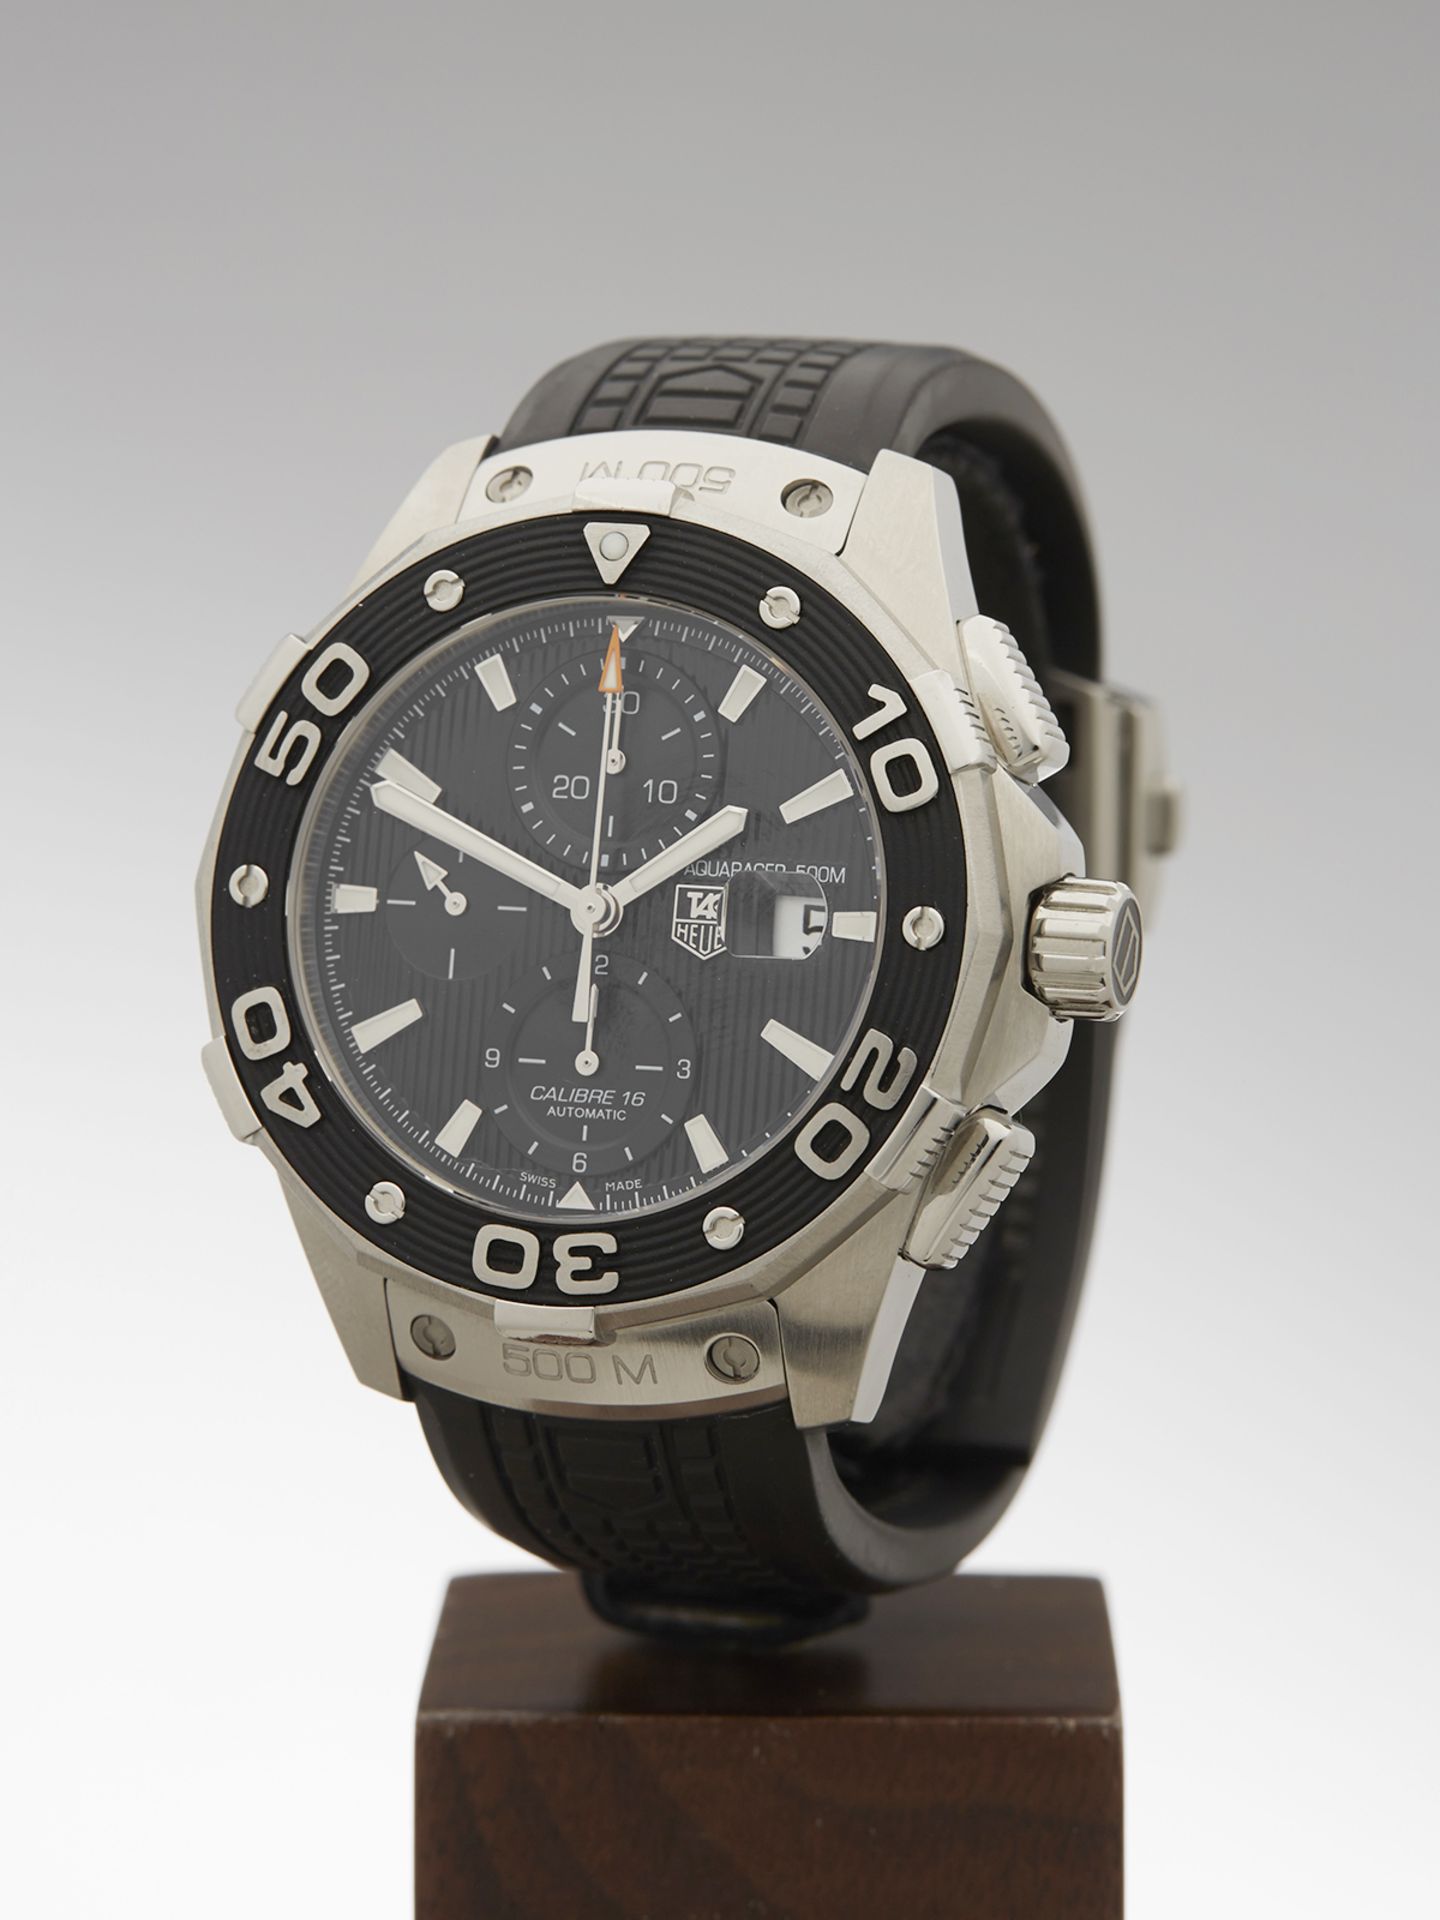 Tag heuer, Aquaracer 44mm Stainless Steel